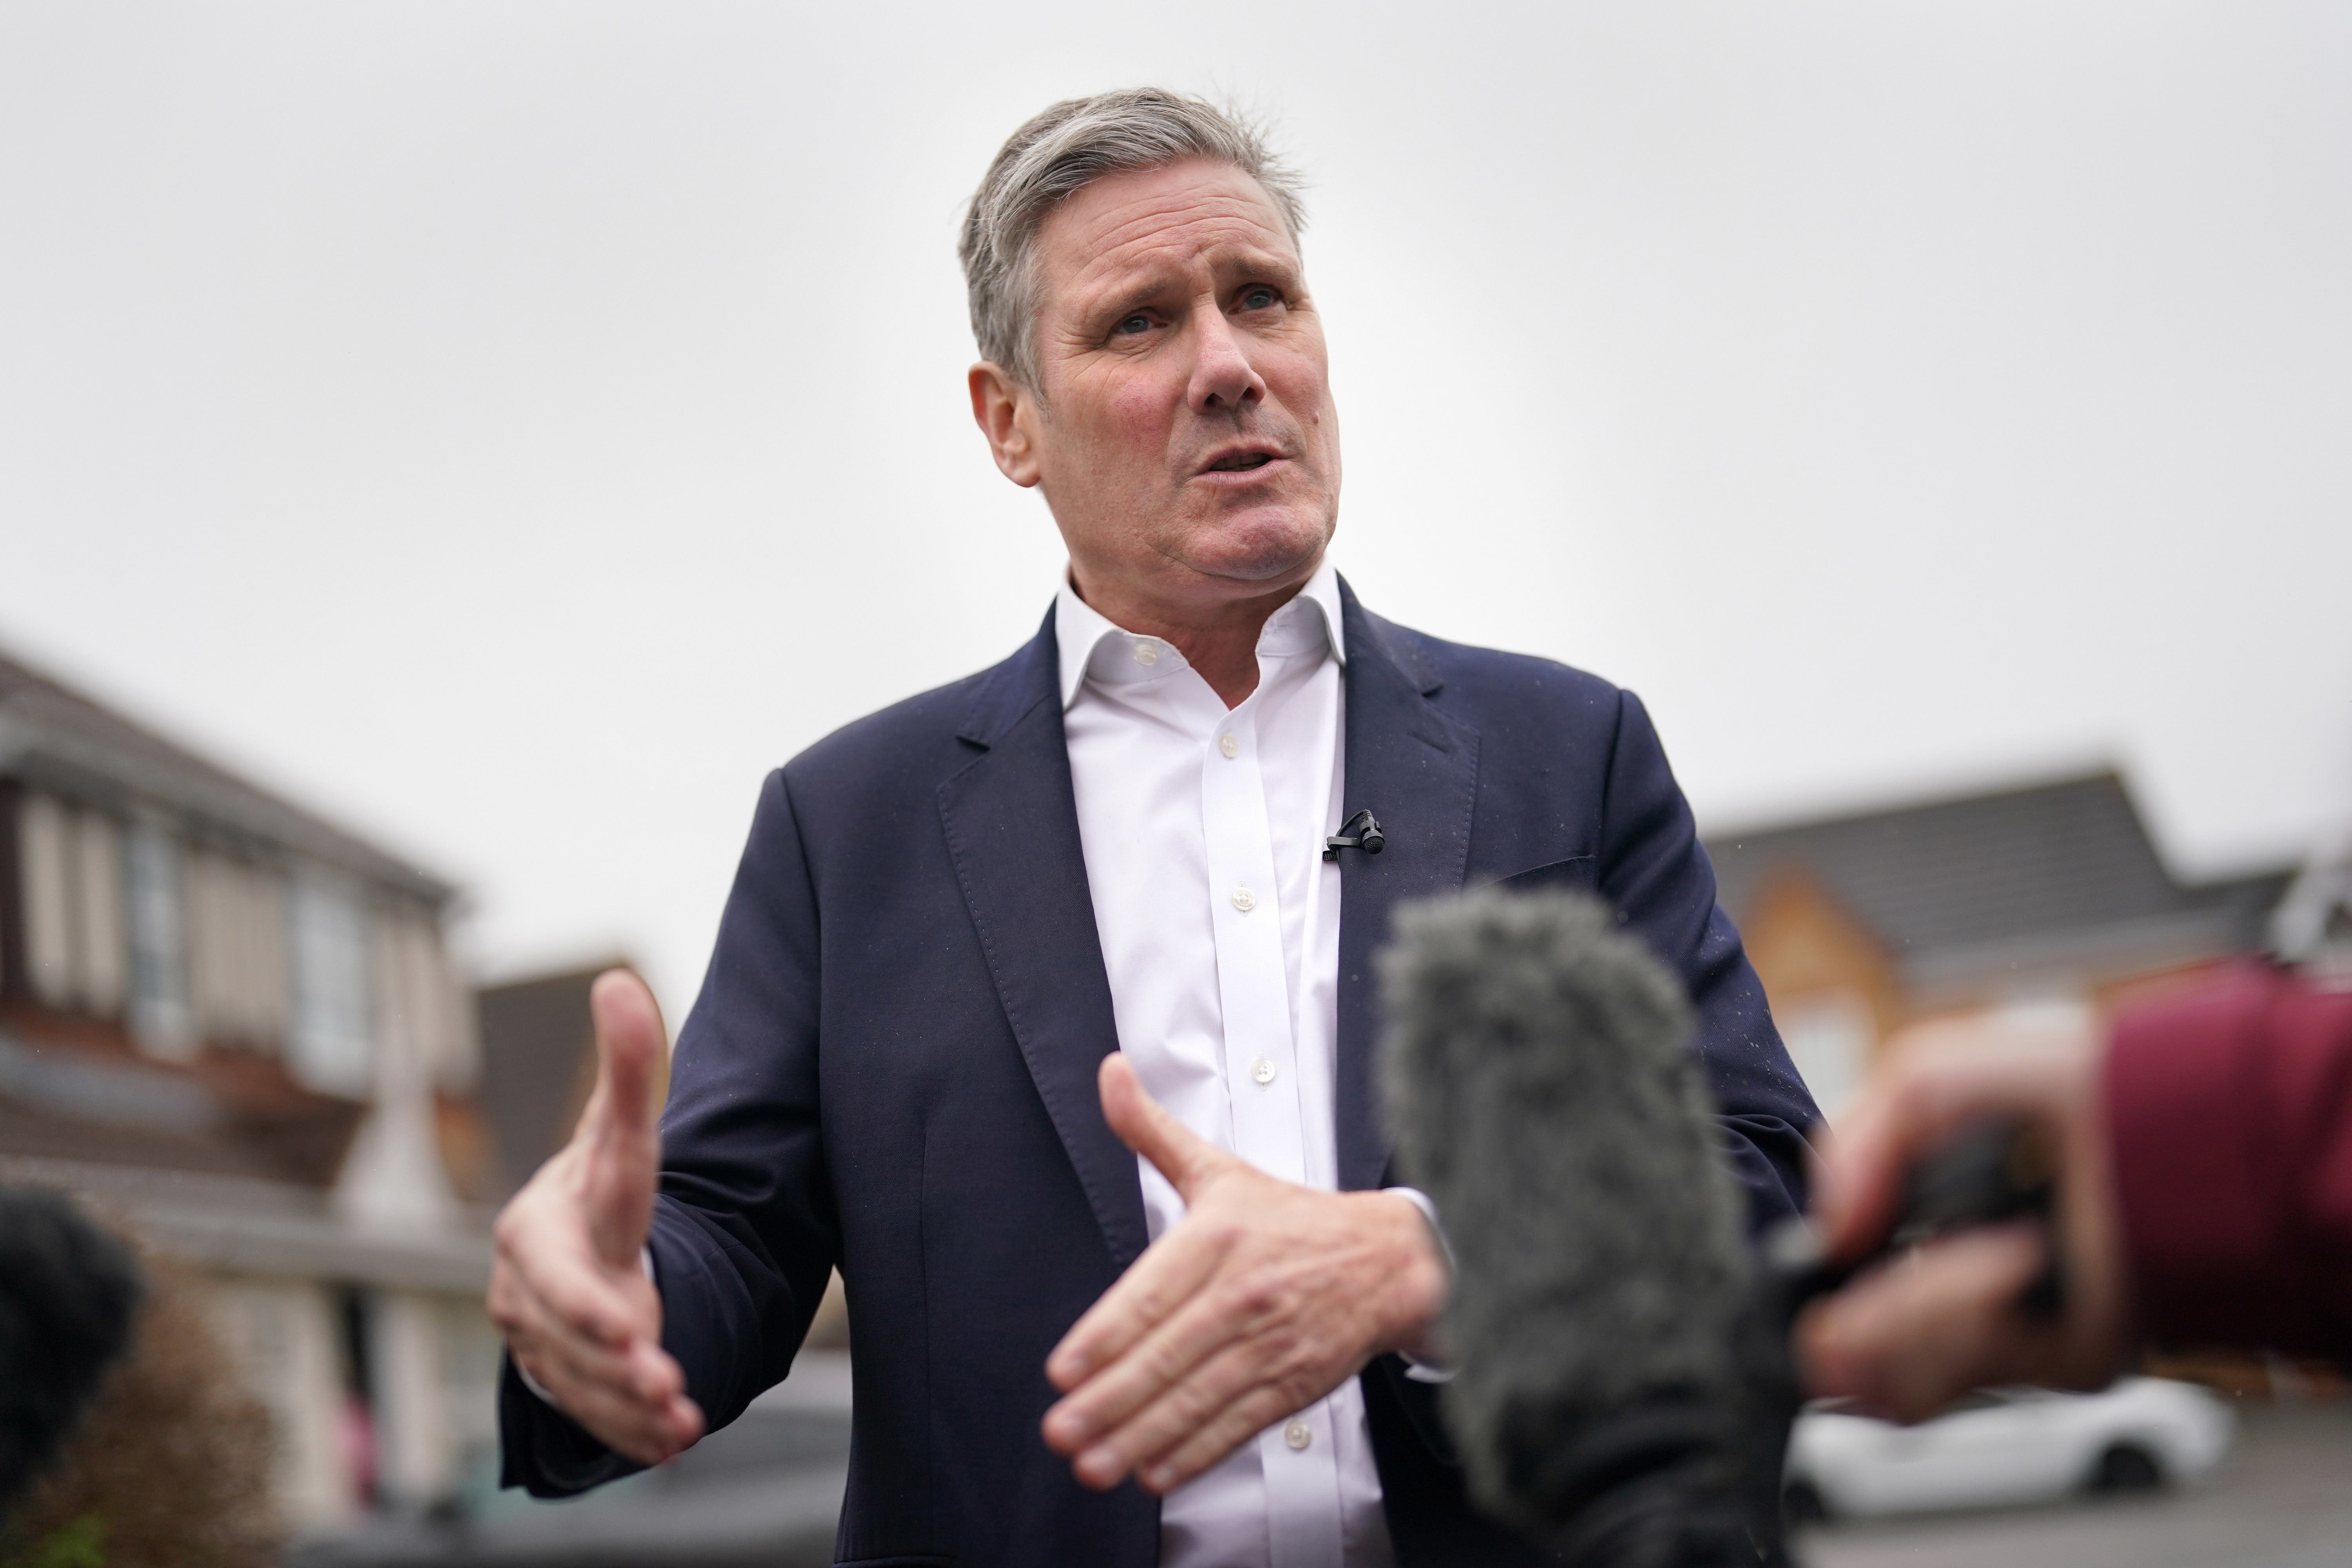 Sir Keir Starmer has said he will maintain the two-child benefit cap